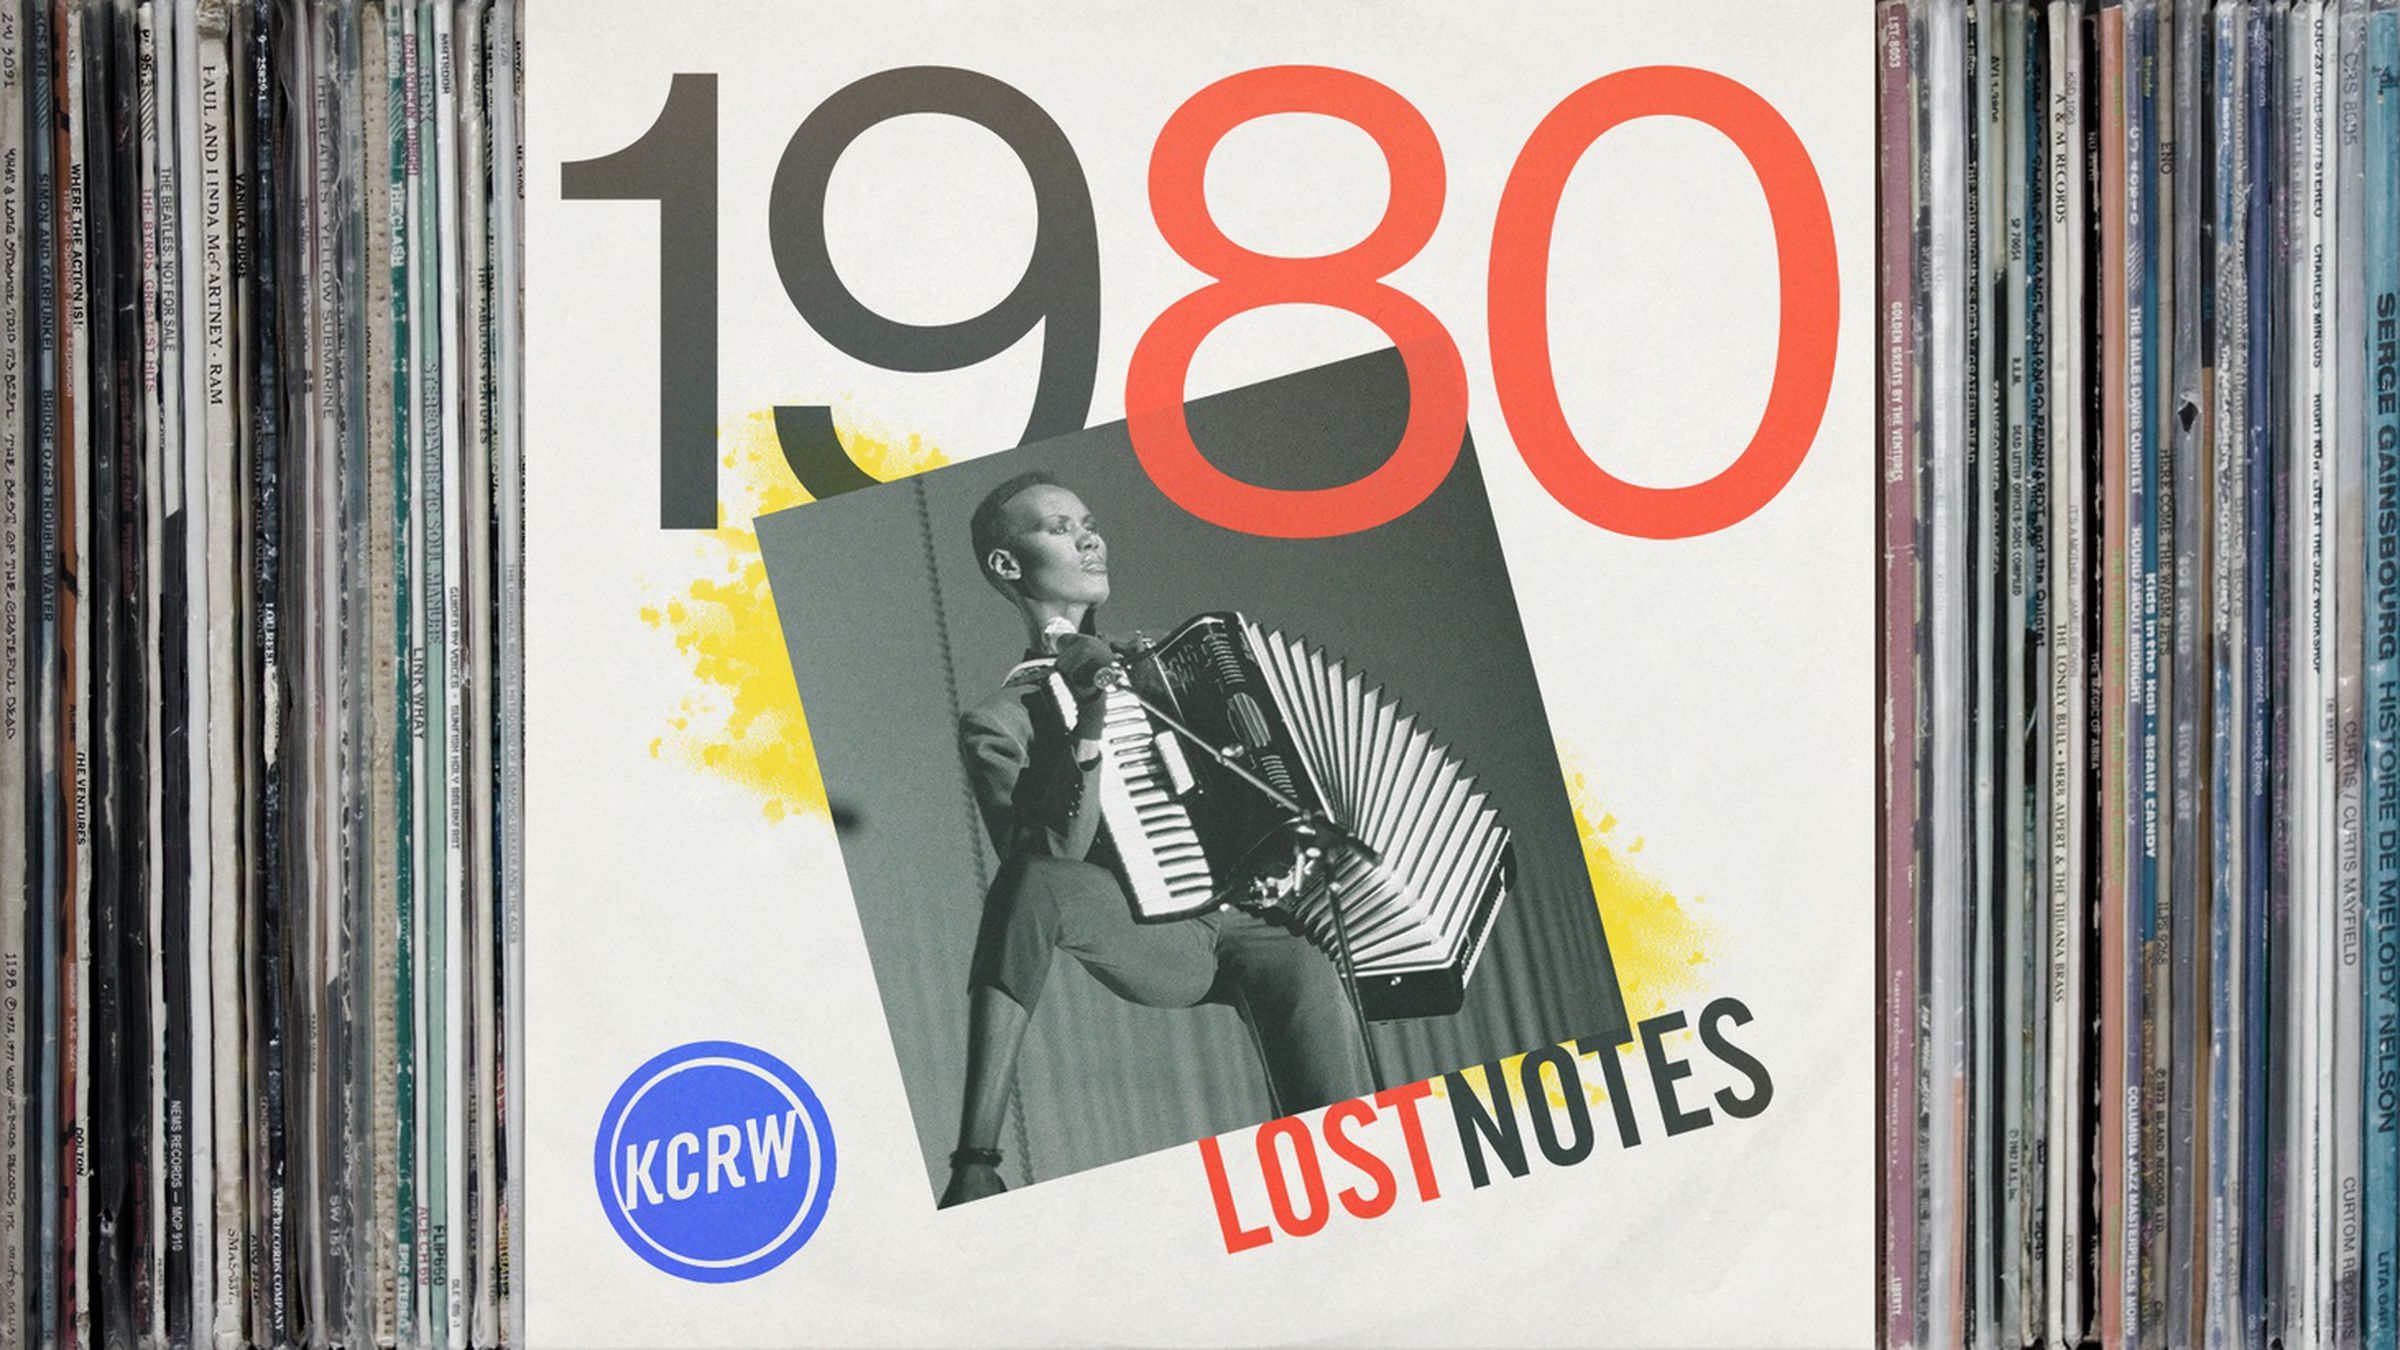 Lost Notes 1980